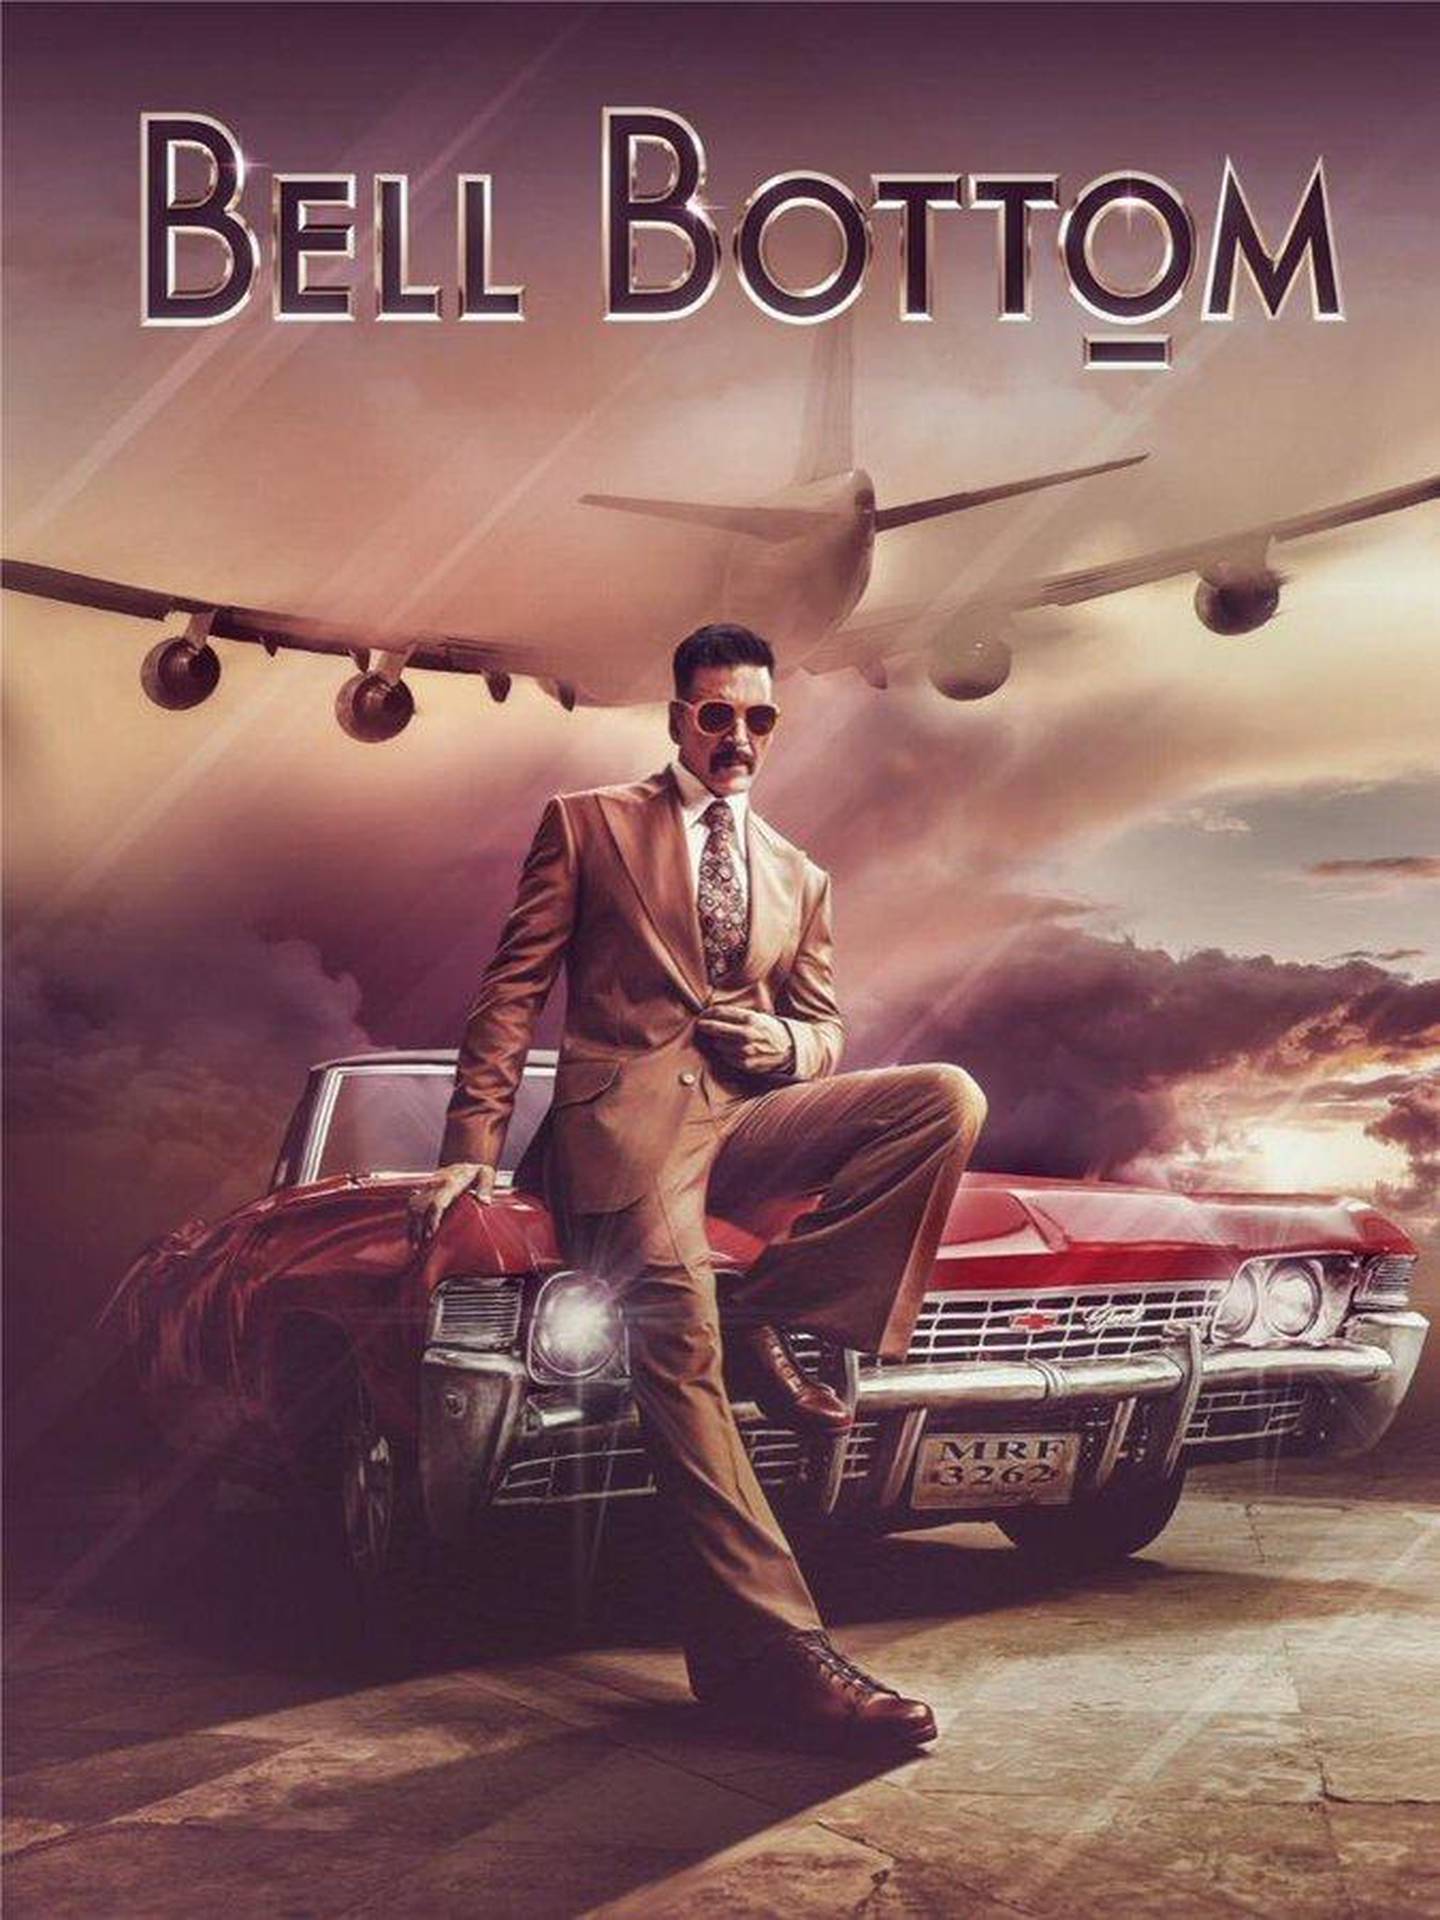 Akshay Kumar's 'Bell Bottom' is set for release in April 2021. It is currently being filmed in Glasgow, Scotland. Pooja Entertainment and Films 